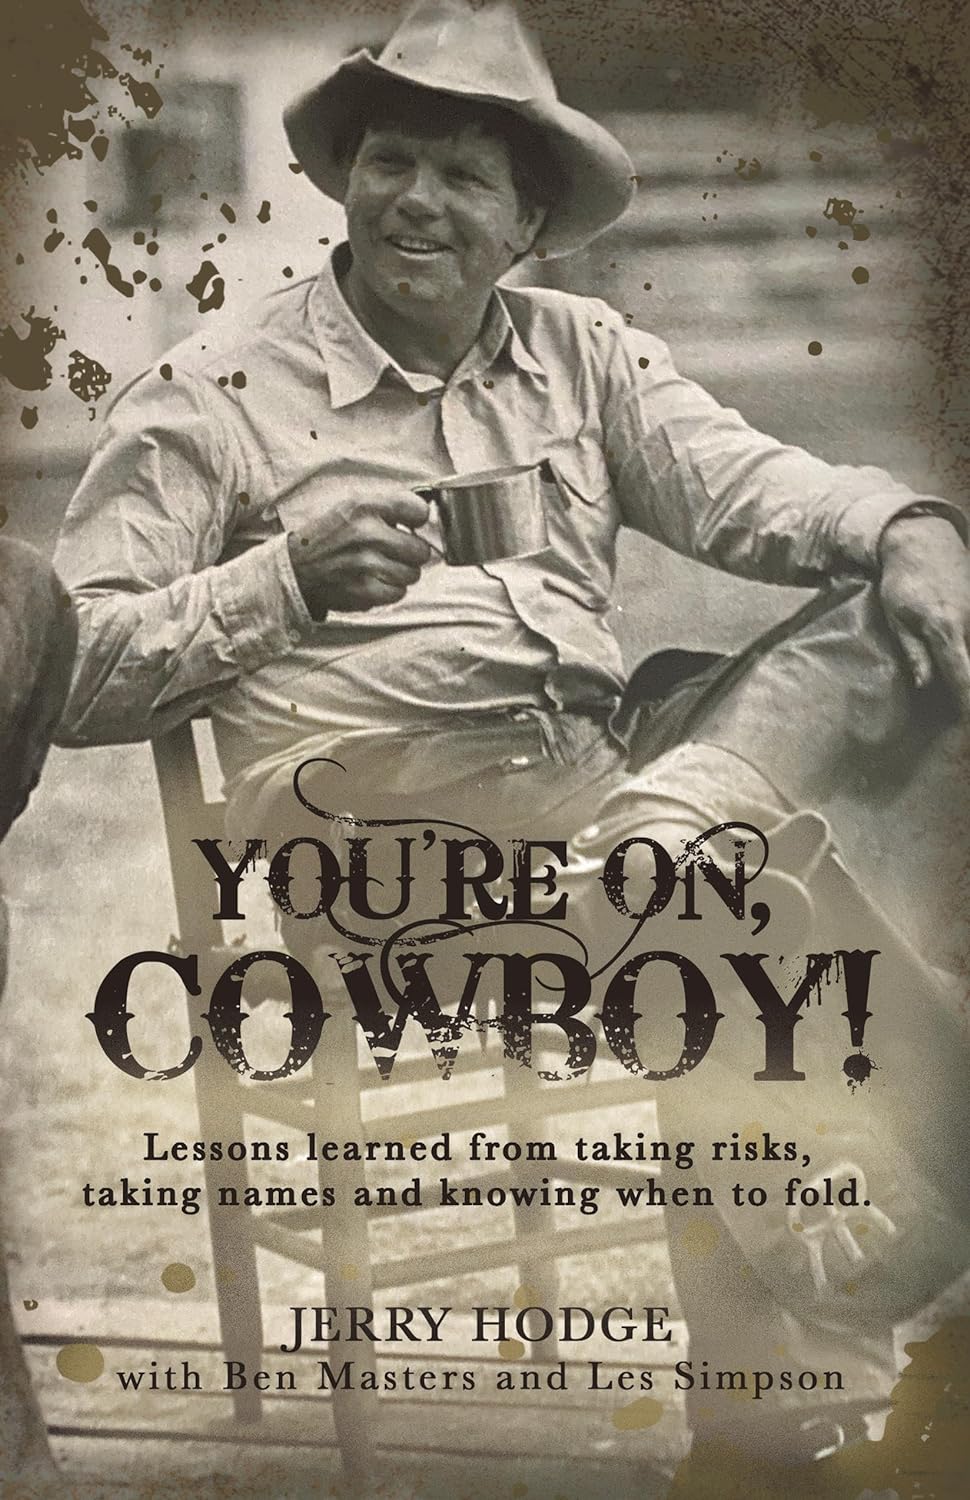 You're On, Cowboy!  by Jerry Hodge